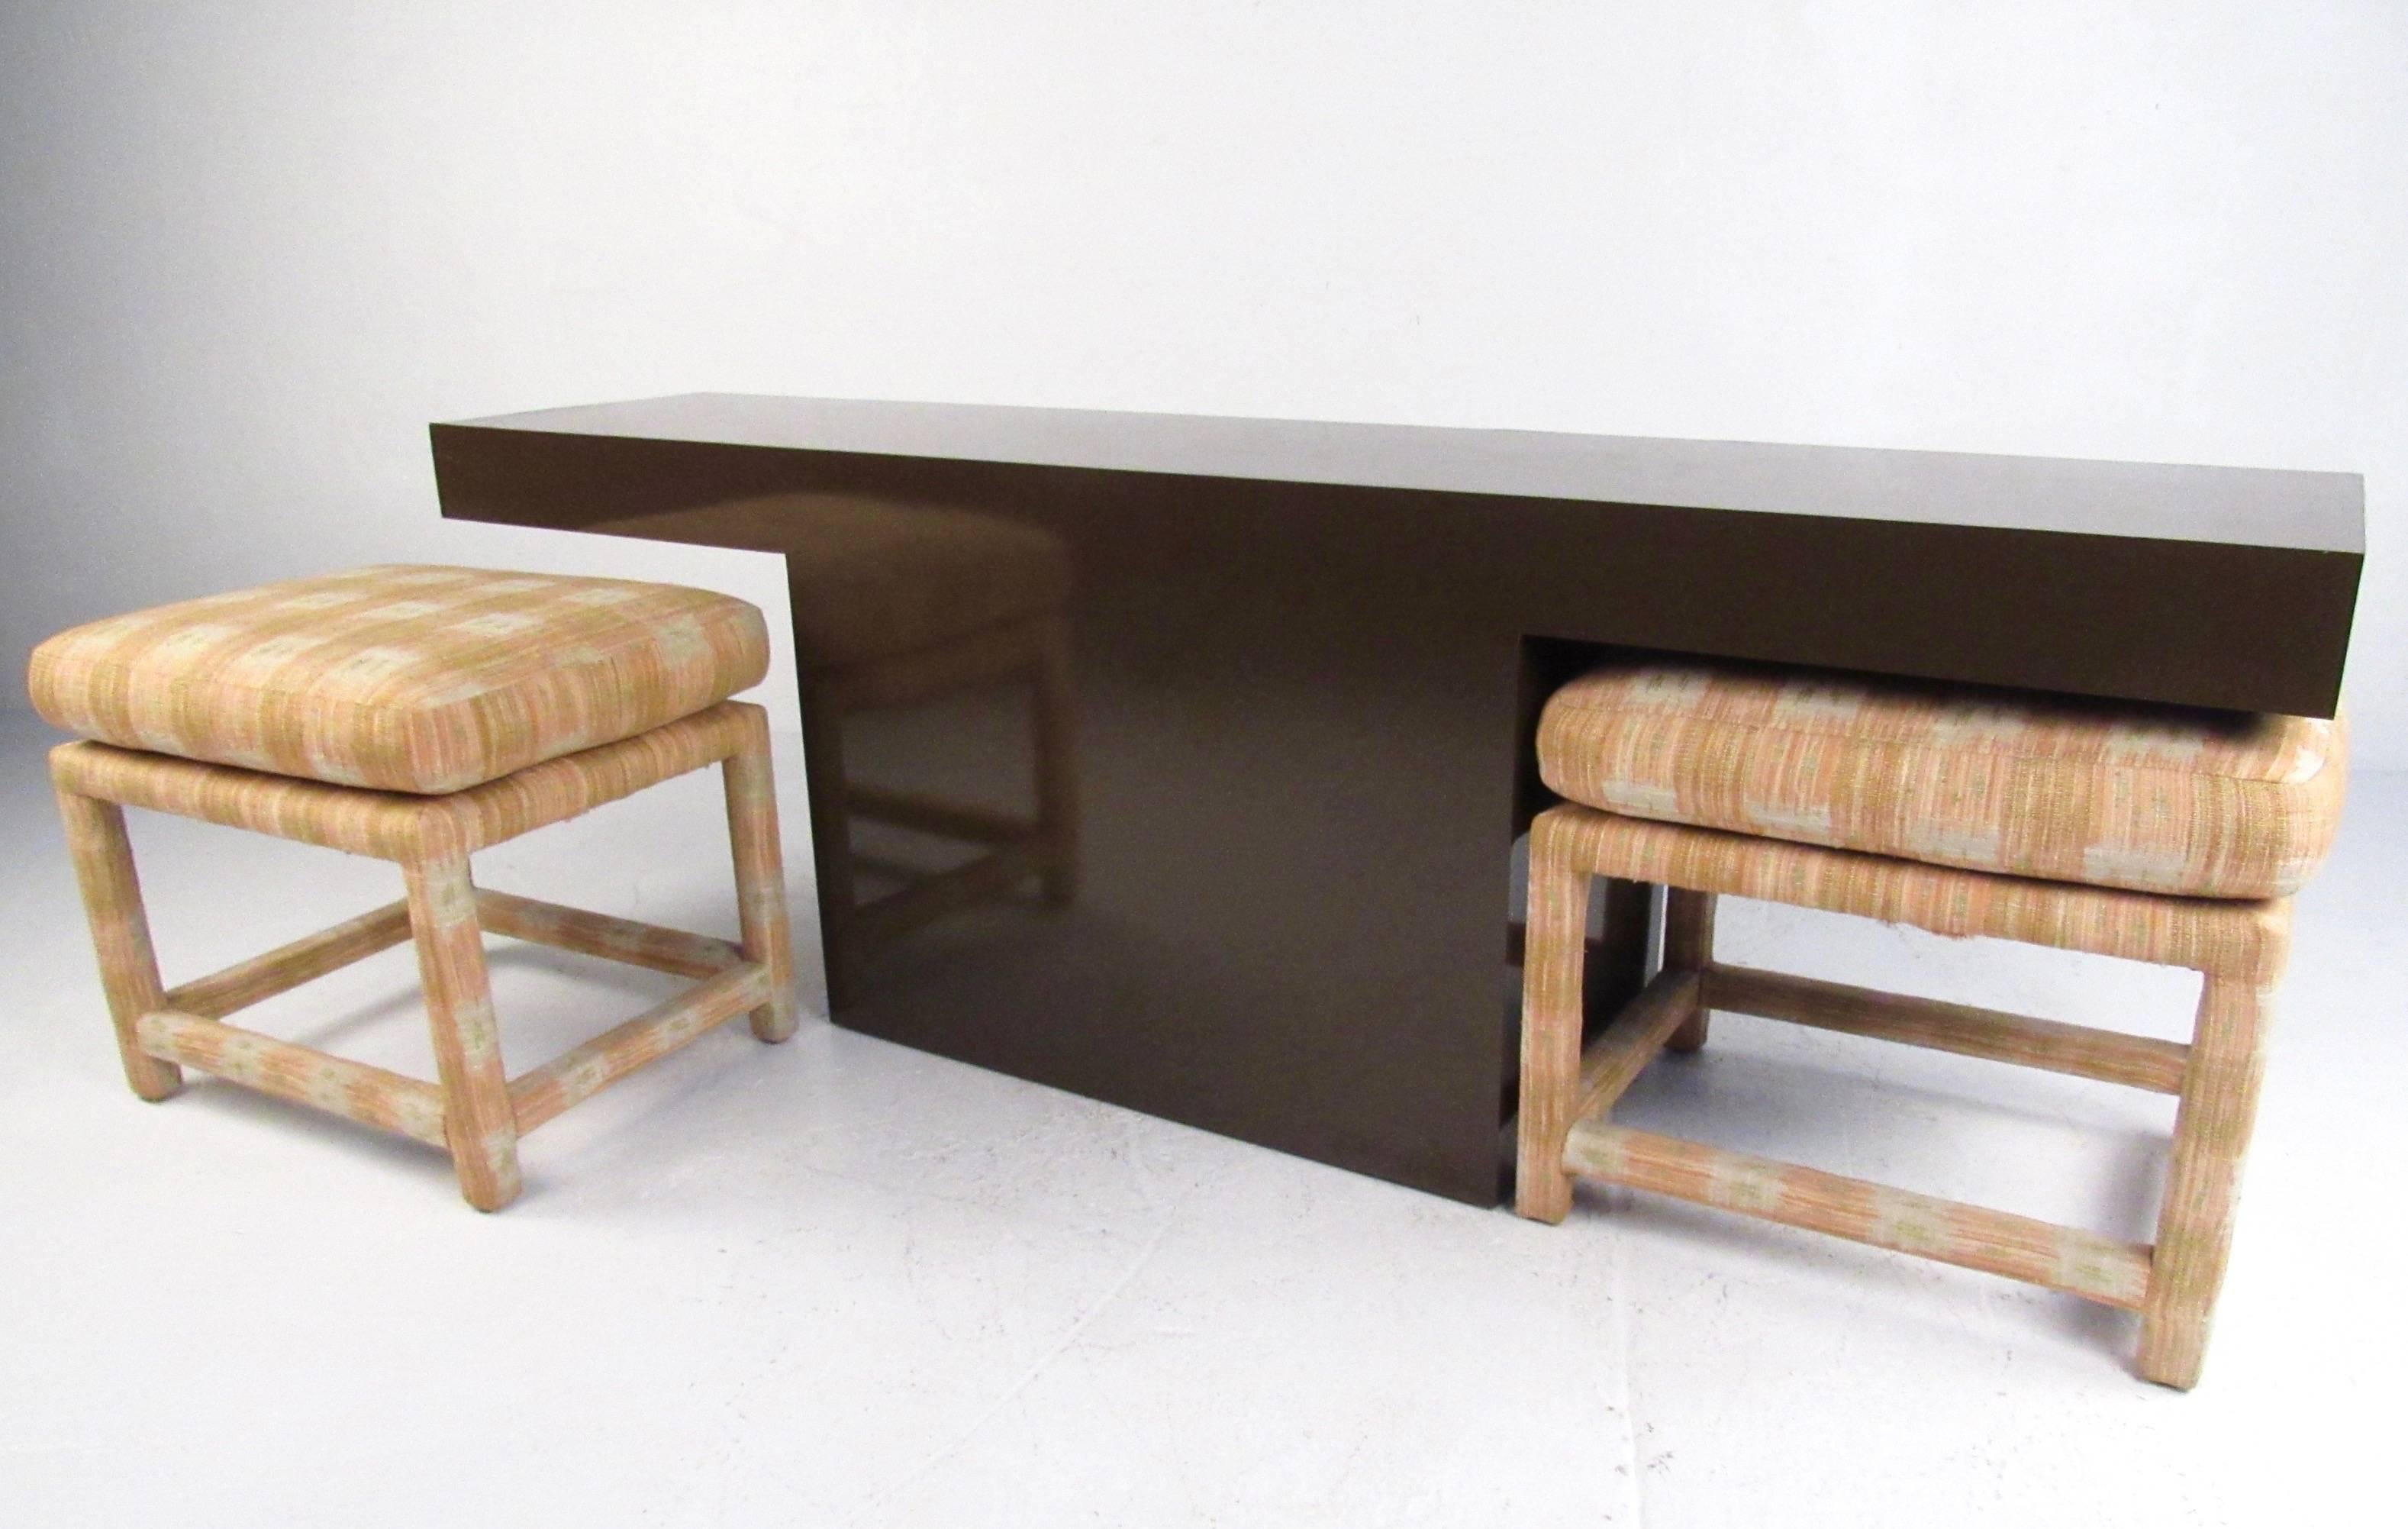 This Mid-Century Modern Milo Baughman console table comes paired with matching parson's style upholstered benches. These stylish four-legged benches feature vintage fabric and unique style, perfectly fitted to the height of the table. This stunning